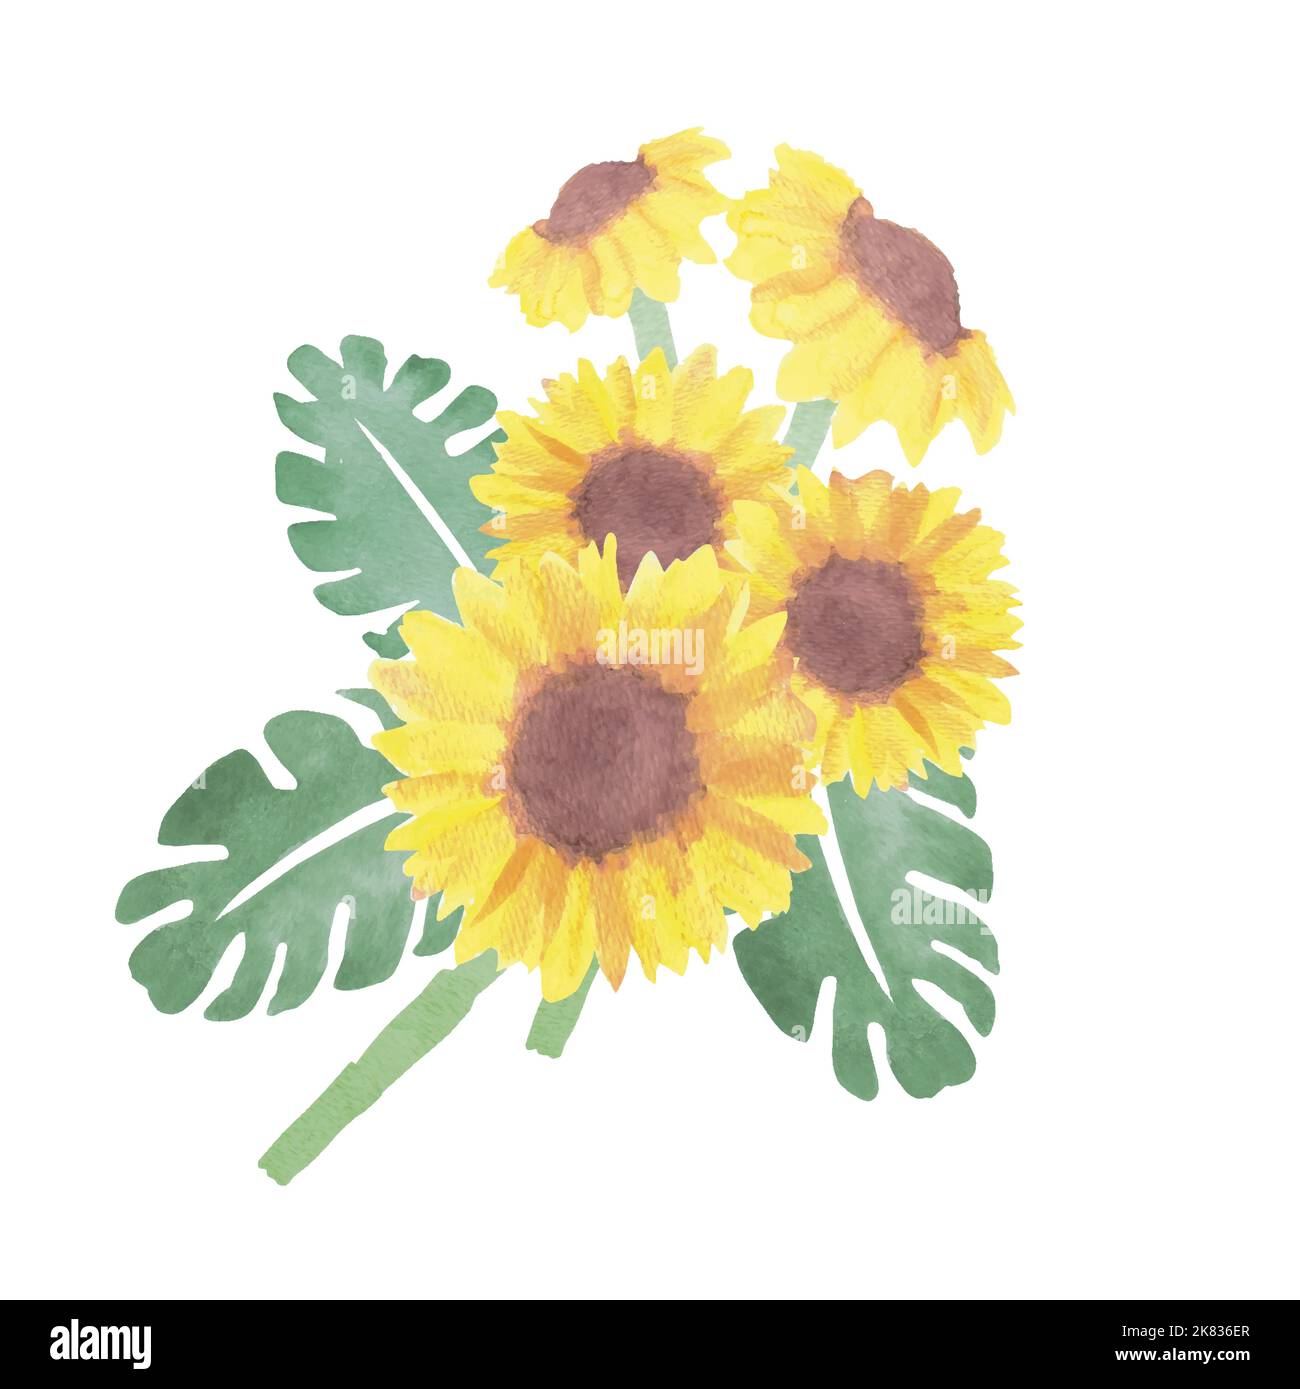 Sunflowers and foliage watercolor Stock Vector